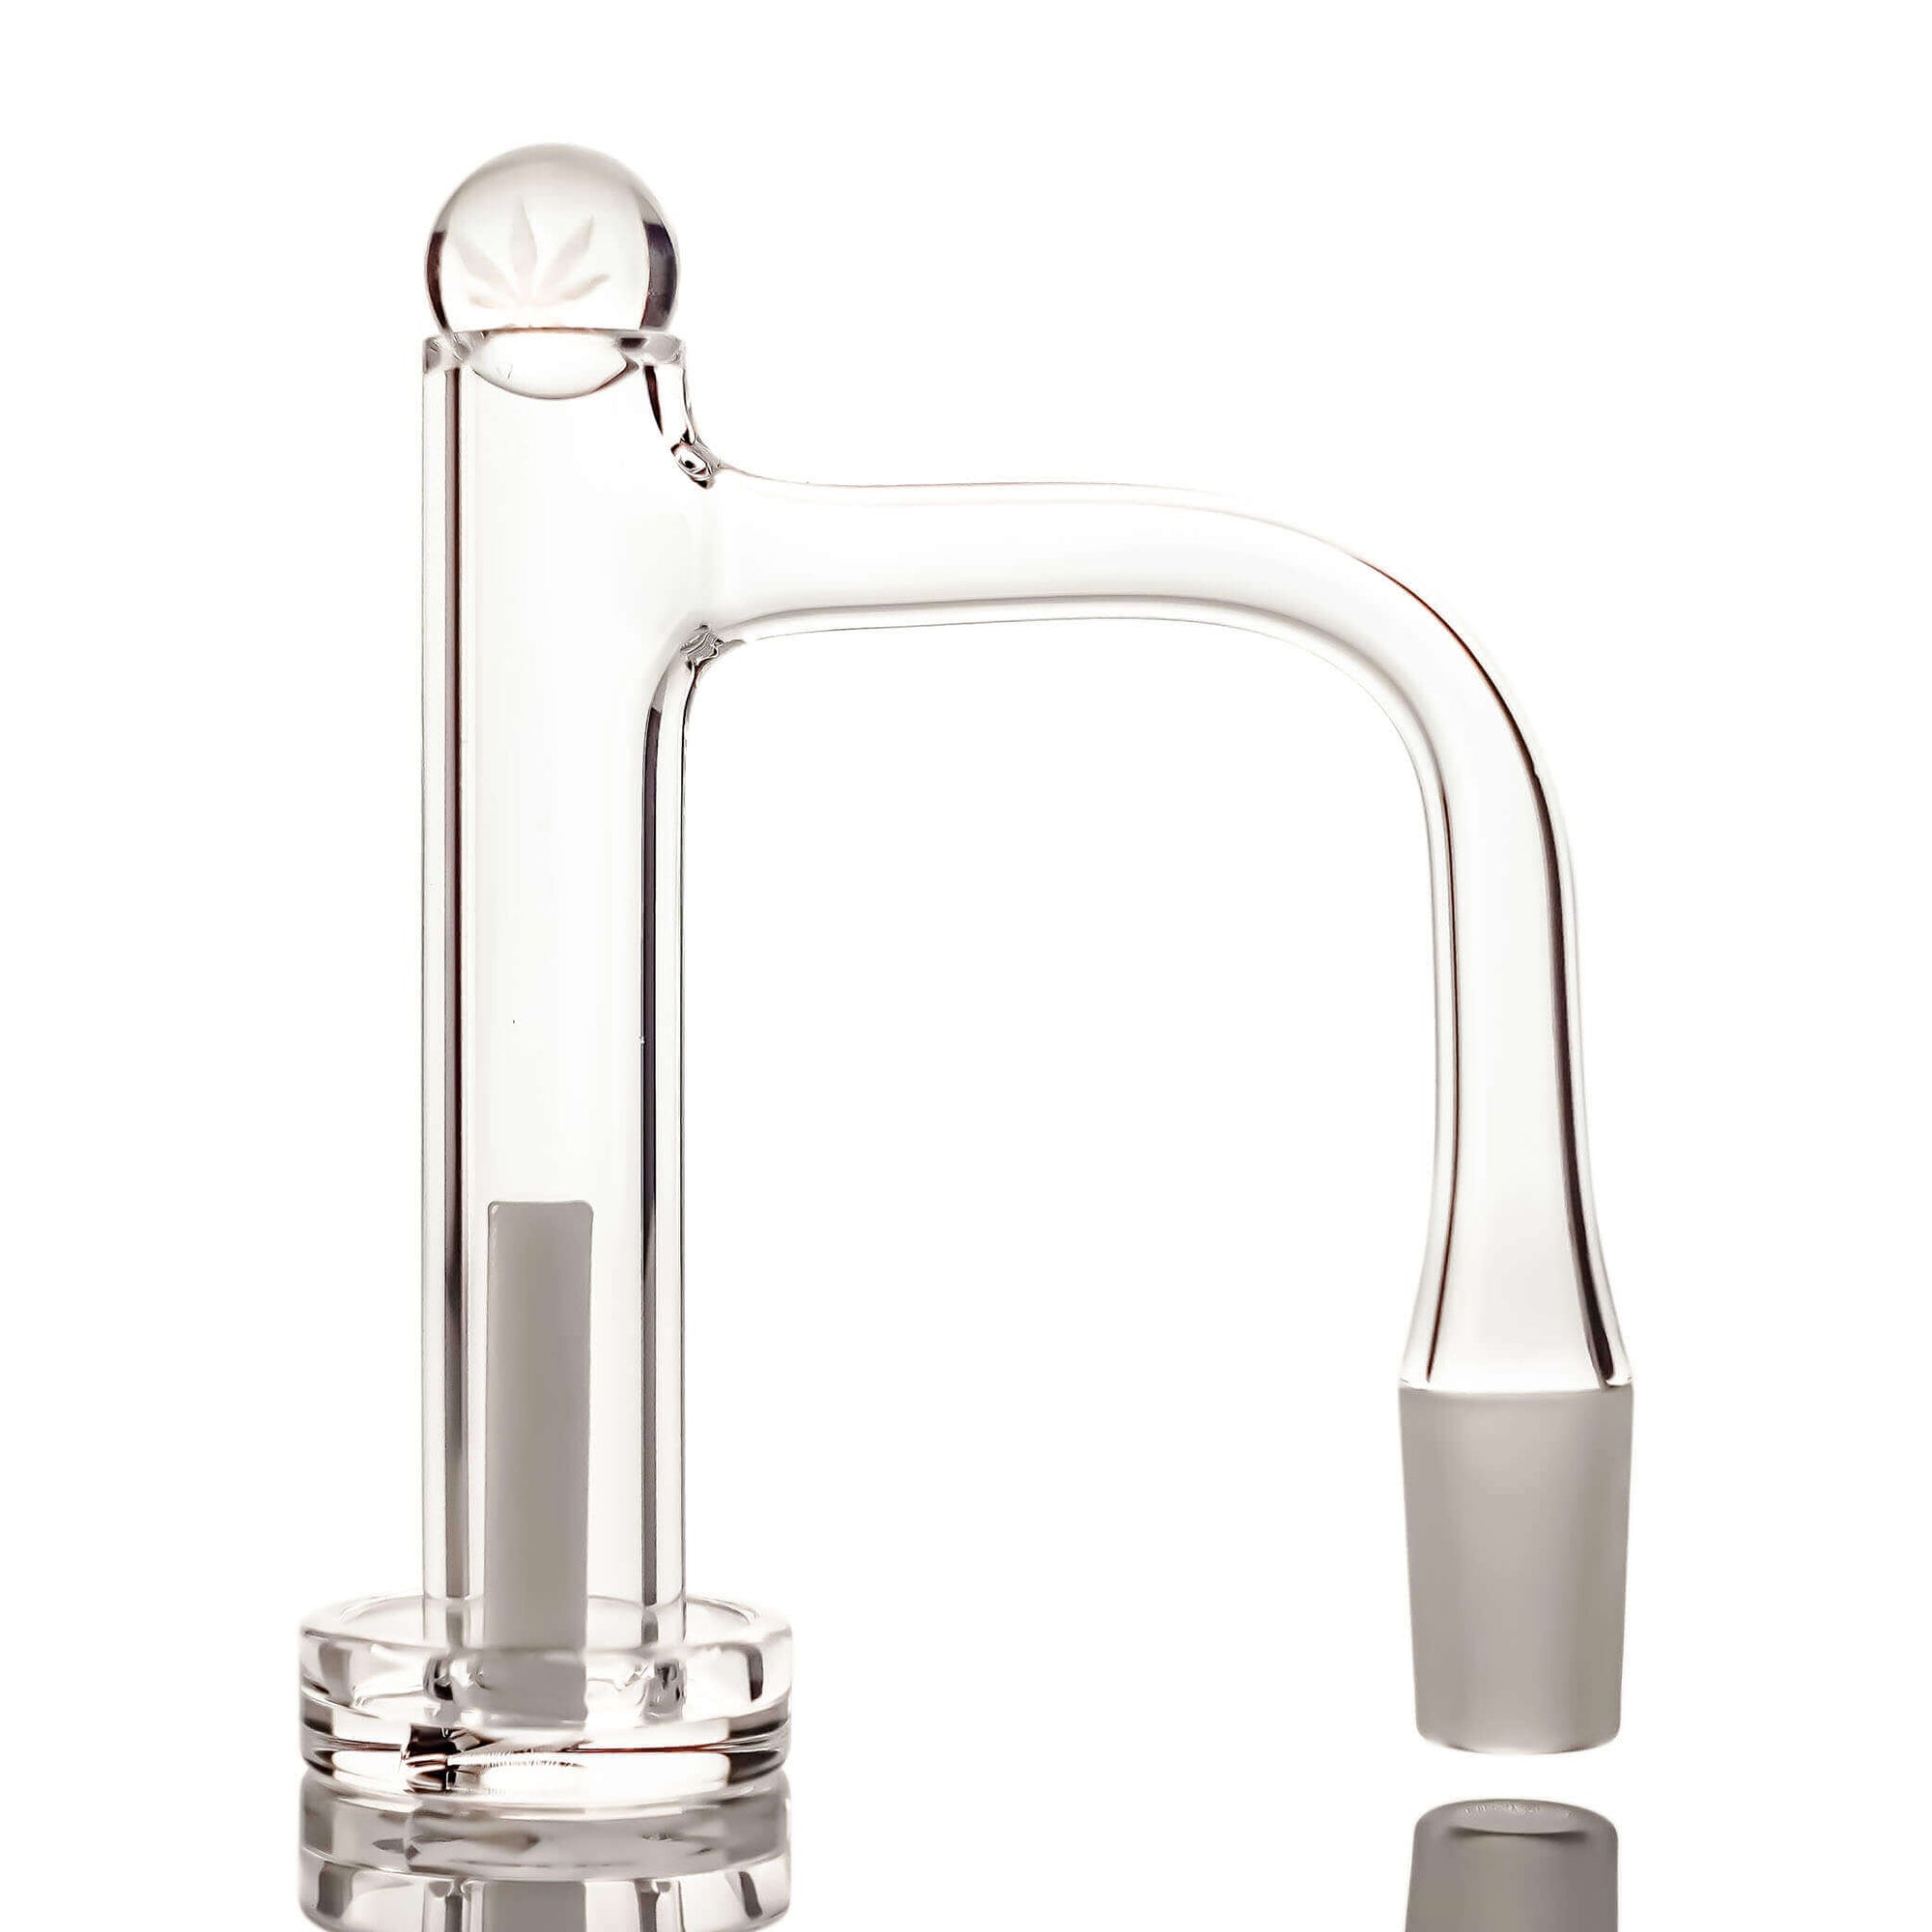 Portable Glass Bubbler Control Tower Dab Kit | Complete Kit Profile View | Dabbing Warehouse